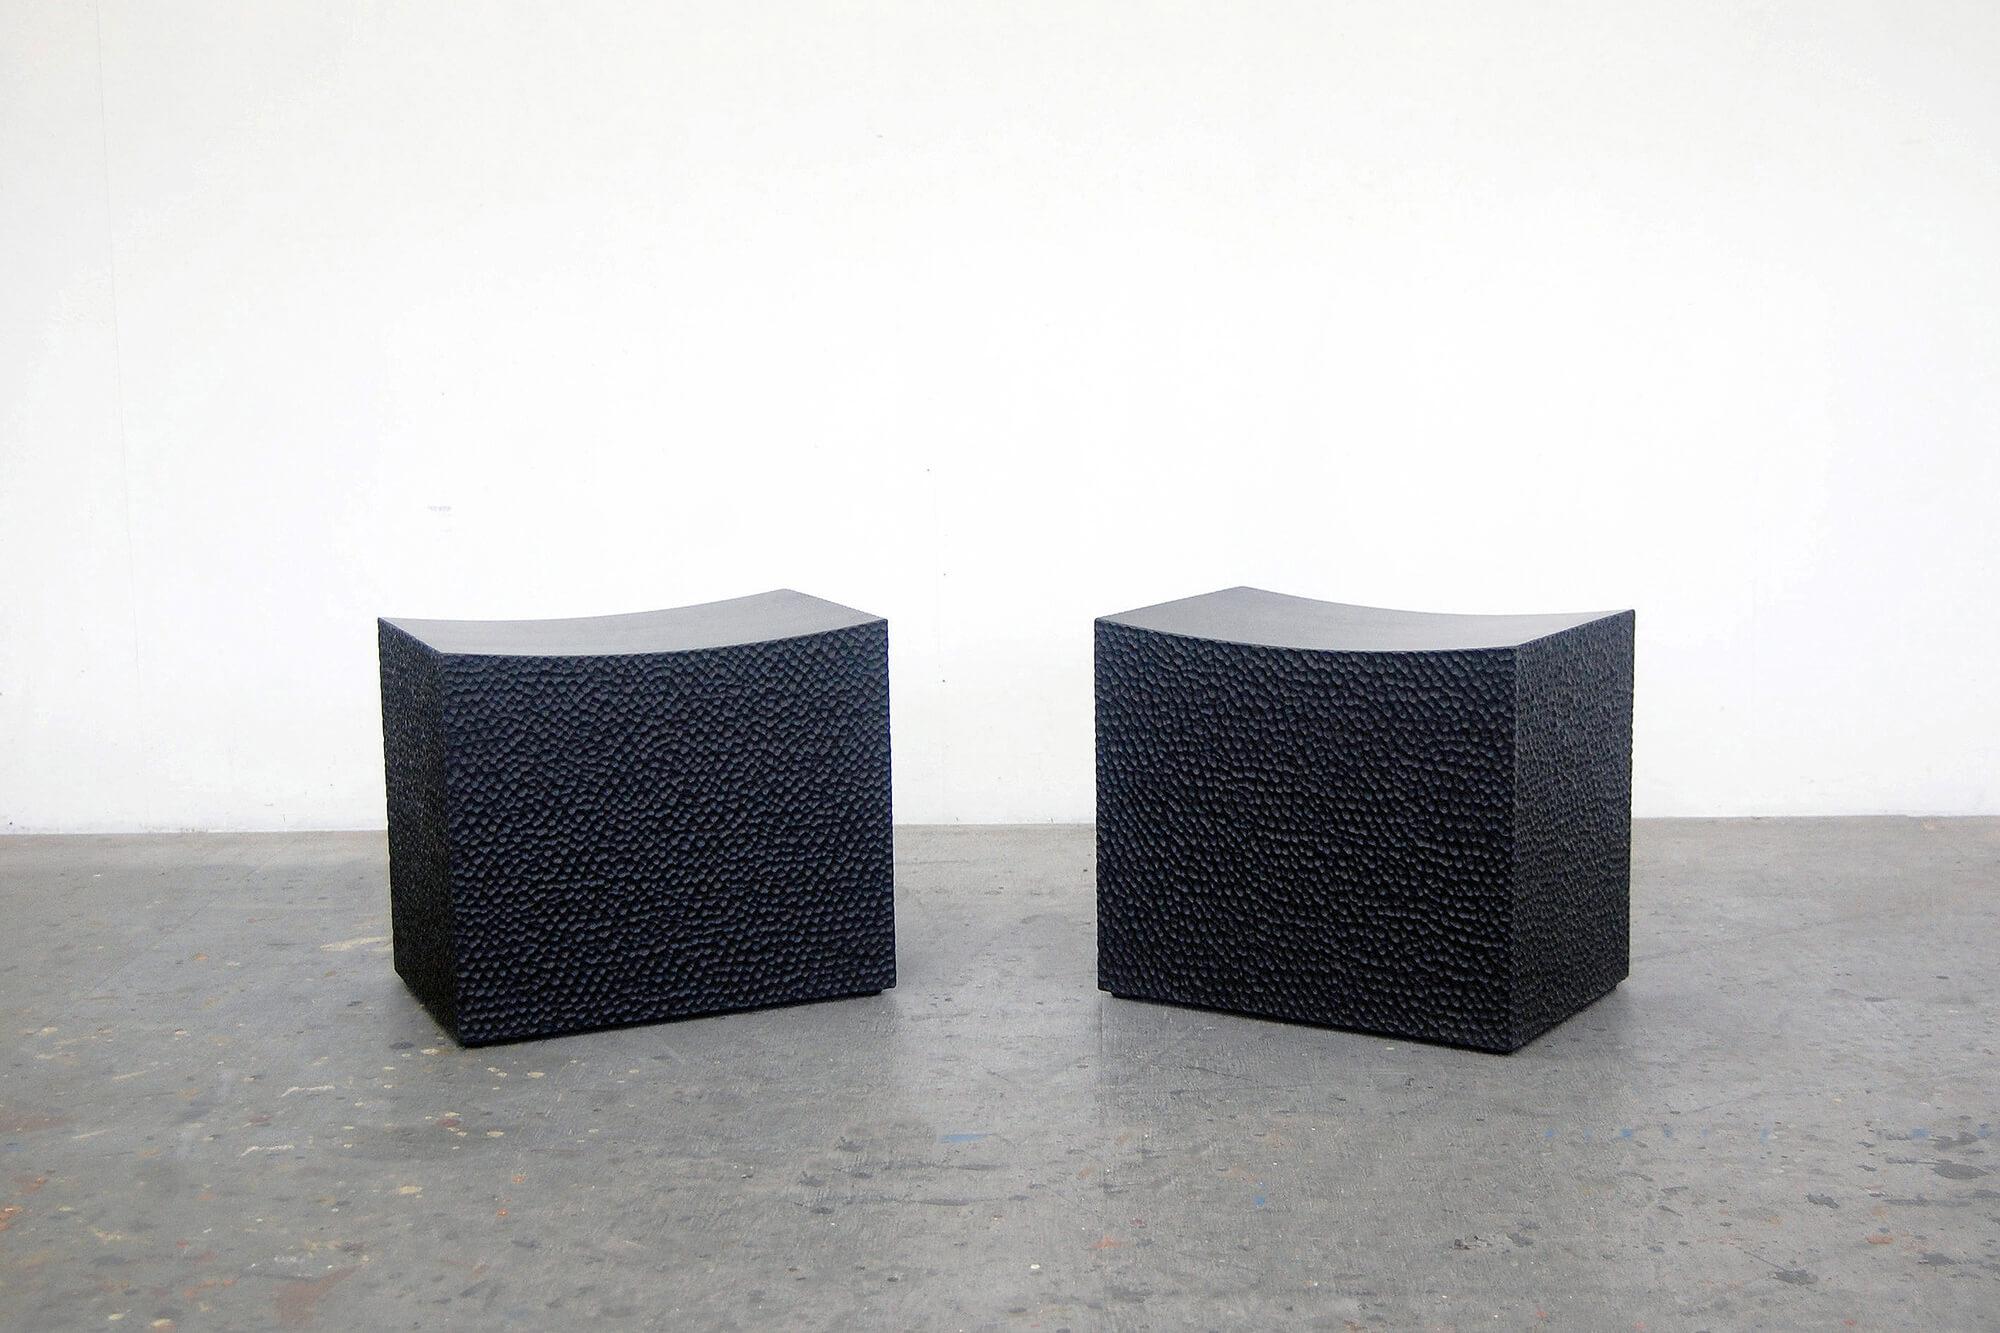 The Block Stools are listed here as a set. Each design is also available for purchase separately at $8,000.

This monolithic piece from John Eric Byers merges bold, modern geometries with traditional craft. The wood is hand-carved and lacquered